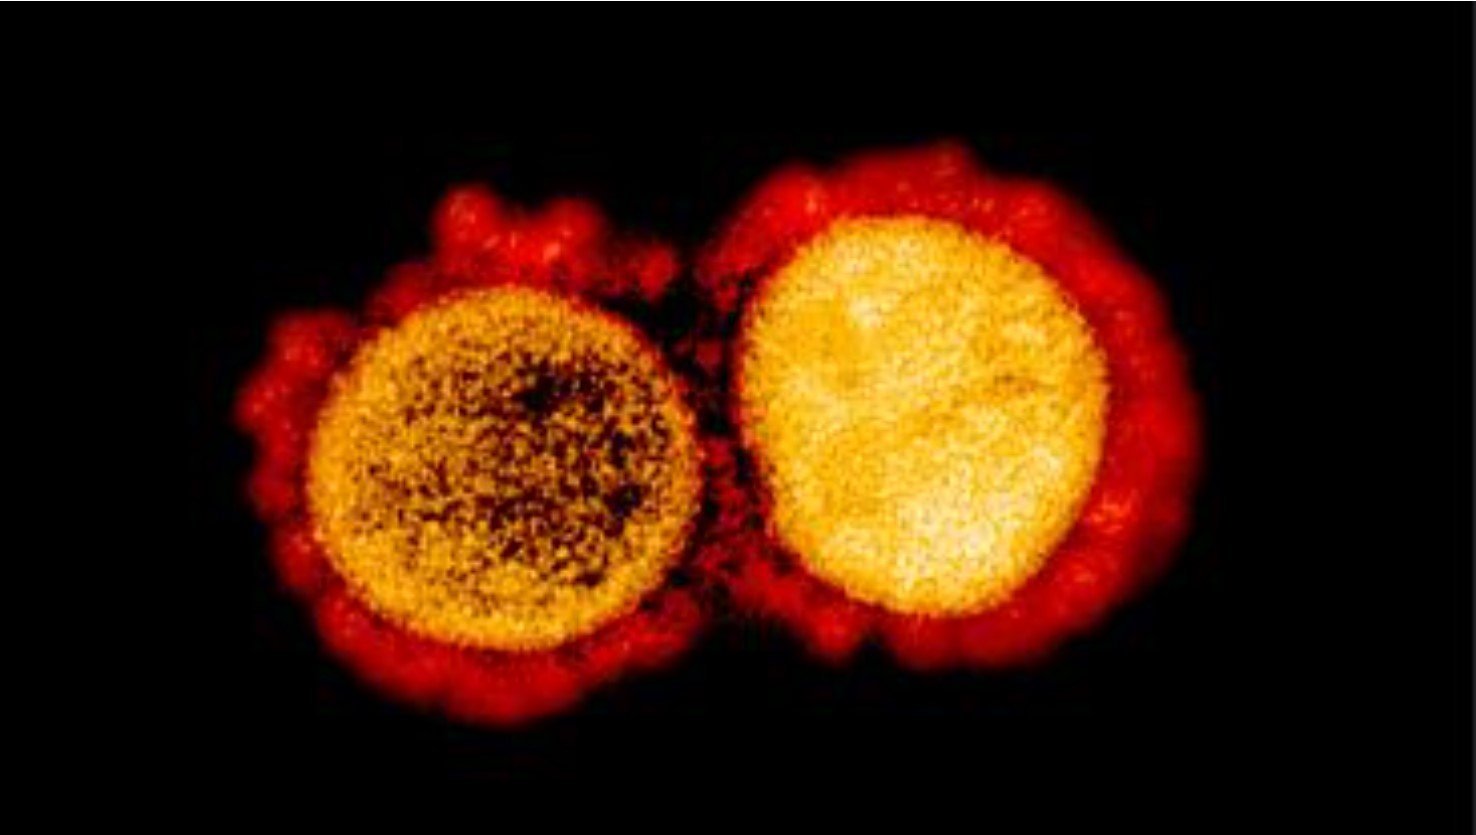 Novel coronavirus SARS CoV2, which causes COVID-19. Meanwhile, new COVID mutations called variants have spread across the U.S., including the newer Omicron variant.
MICROPHOTOGRAPHY BY NATIONAL INSTITUTE ON ALLERGY AND INFECTIOUS DISEASES.